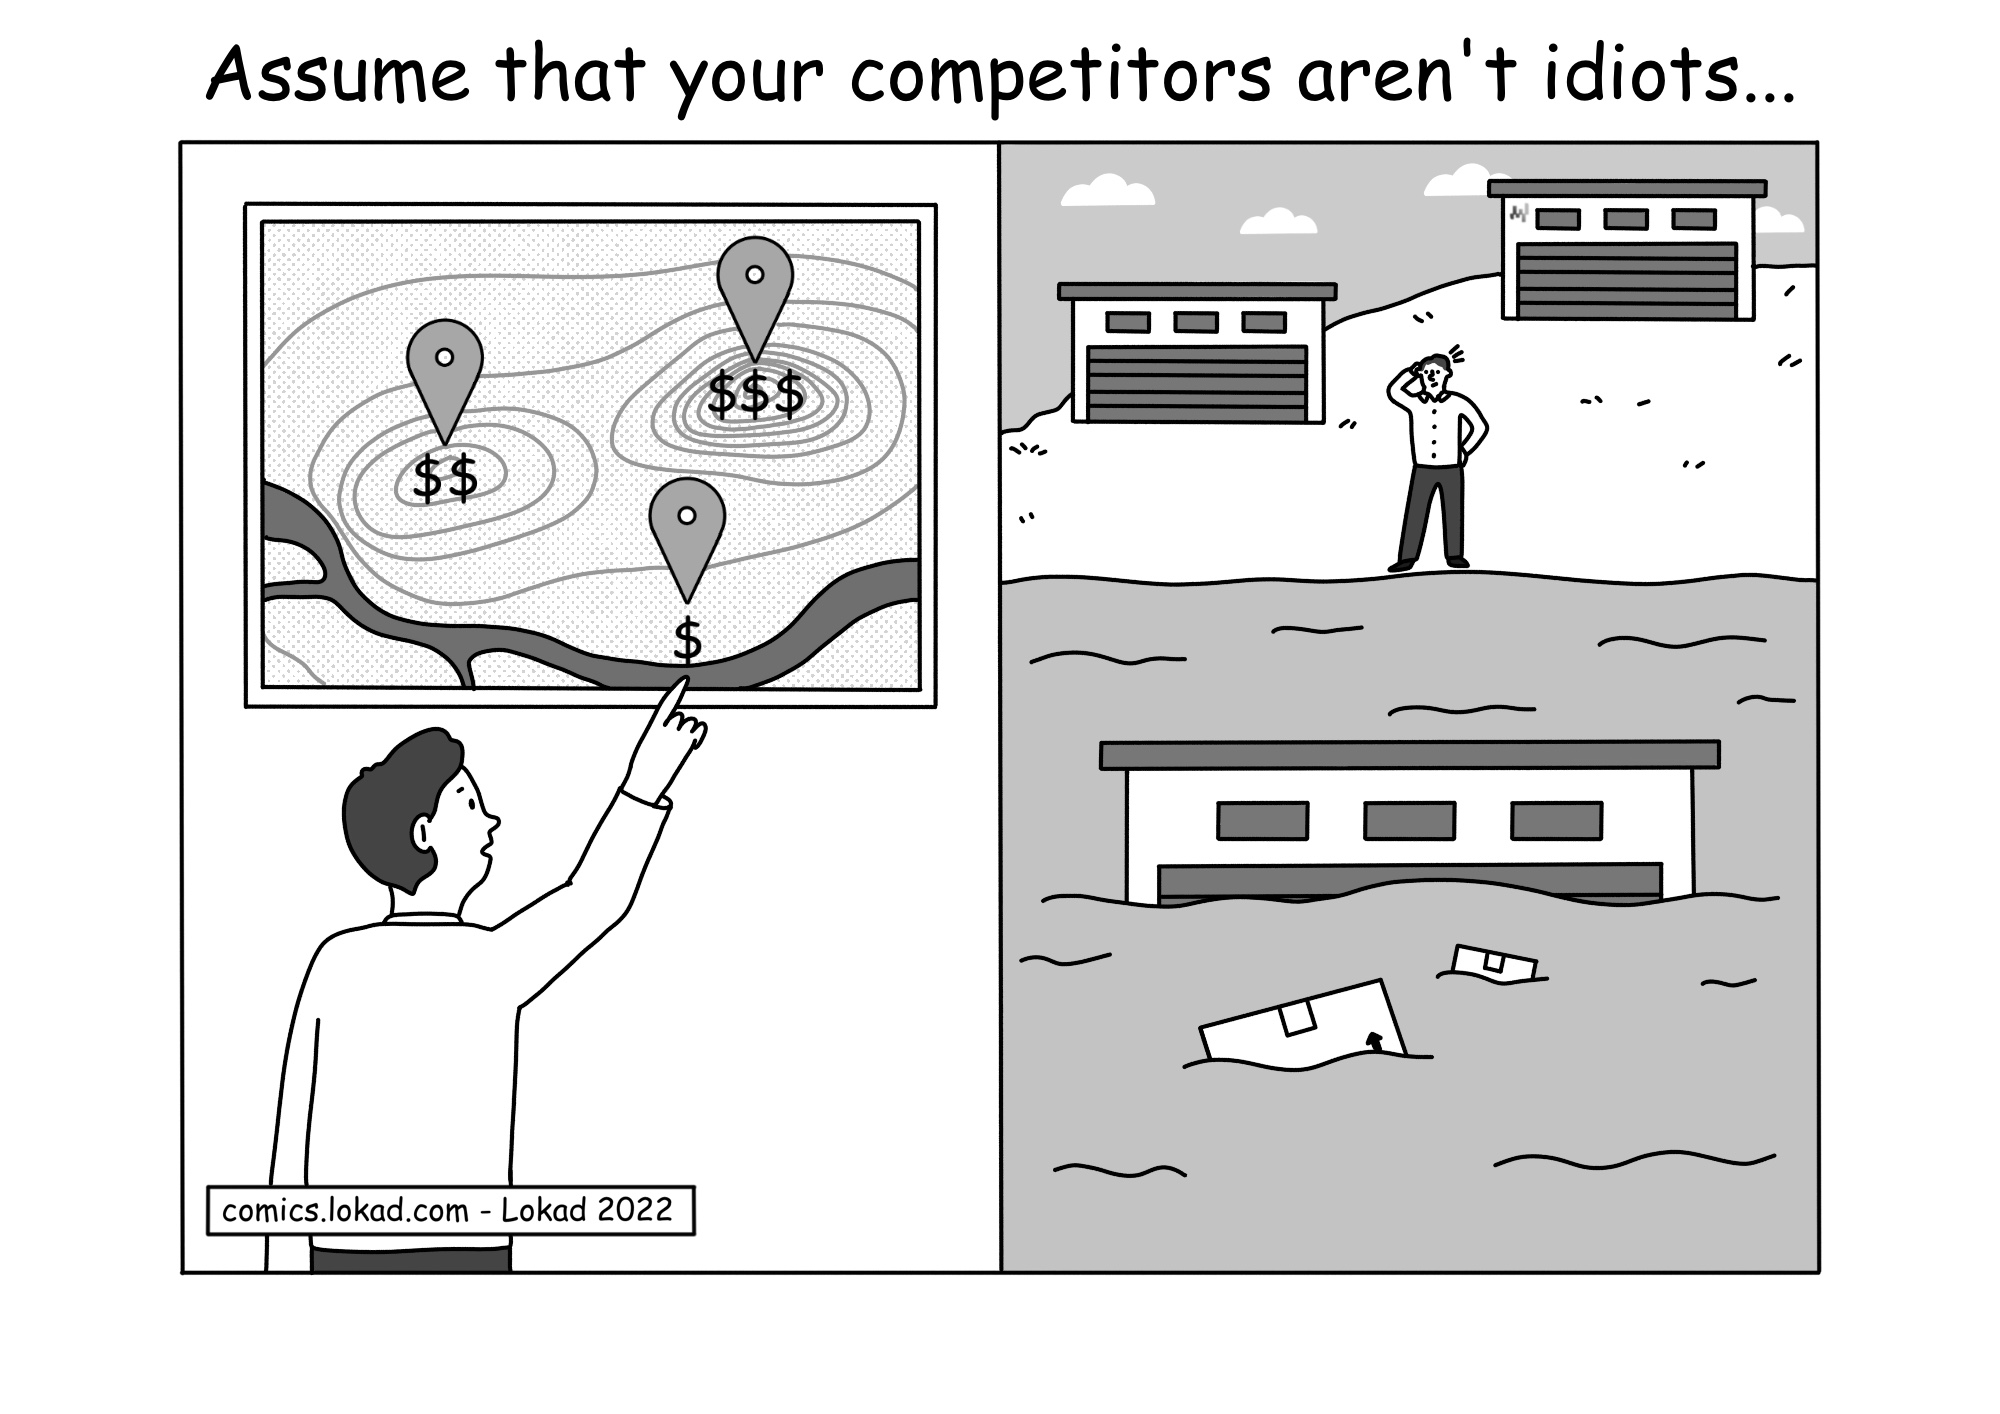 Assume that your competitors aren't idiots...